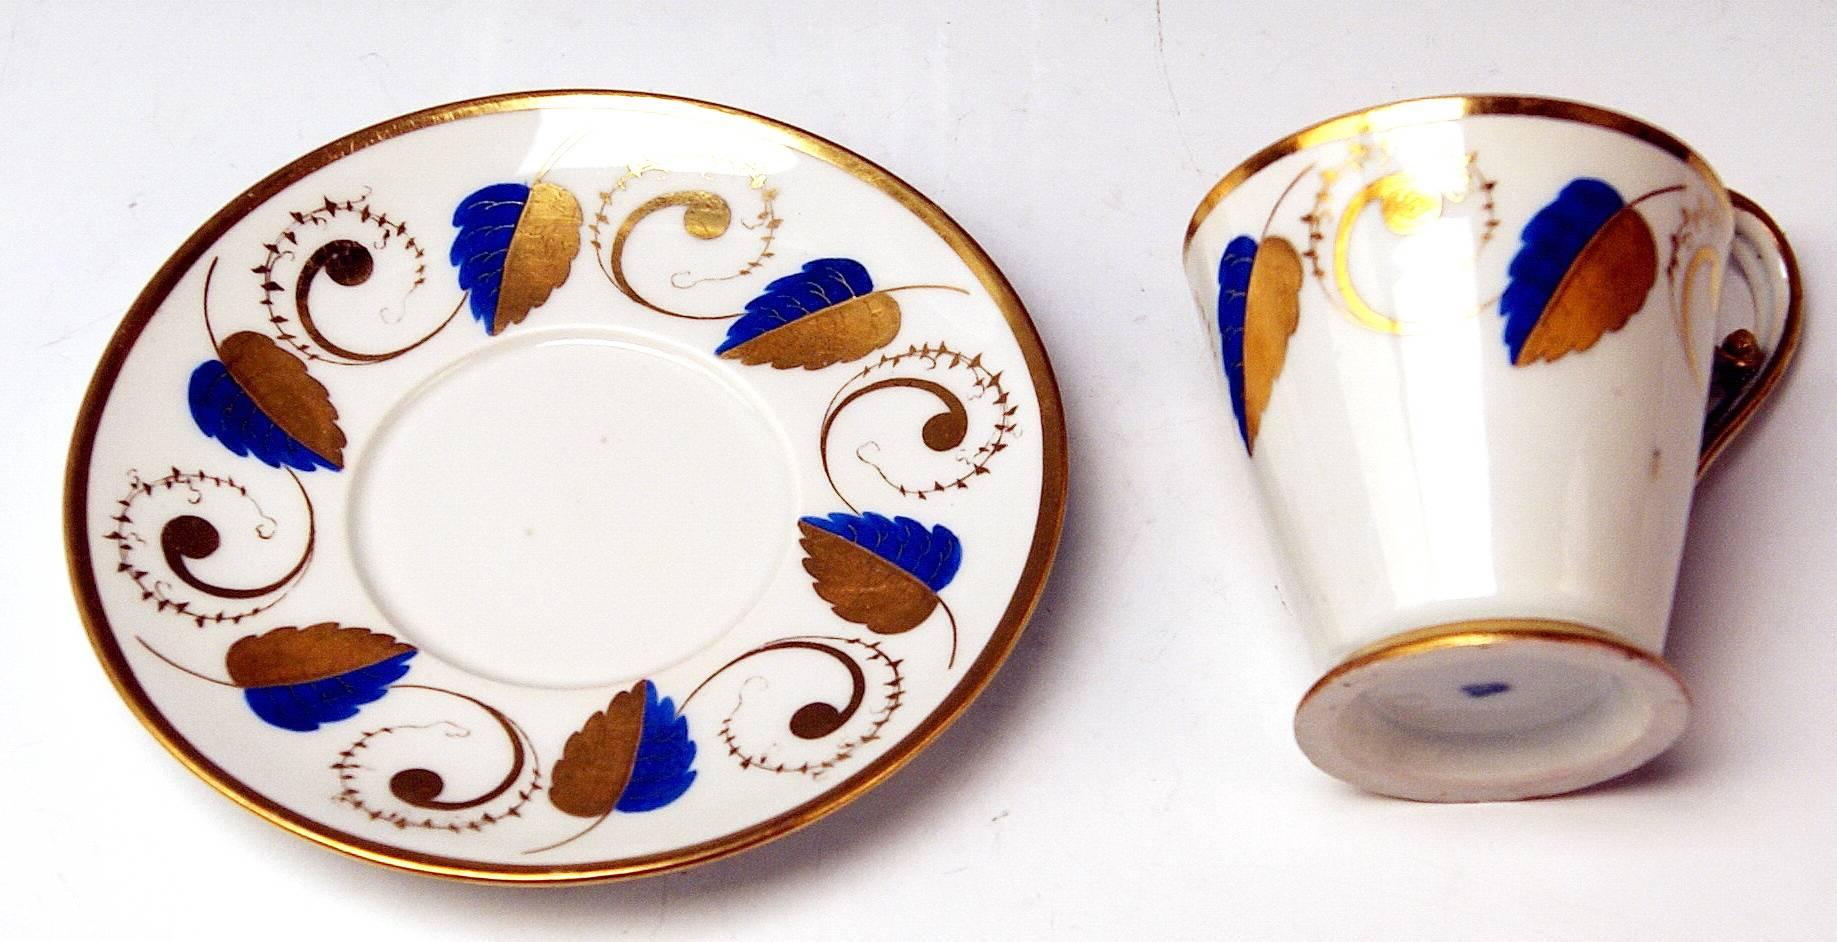 Austrian Vienna Imperial Porcelain Cup Saucer Golden Blue Ornaments with Leaves 1812